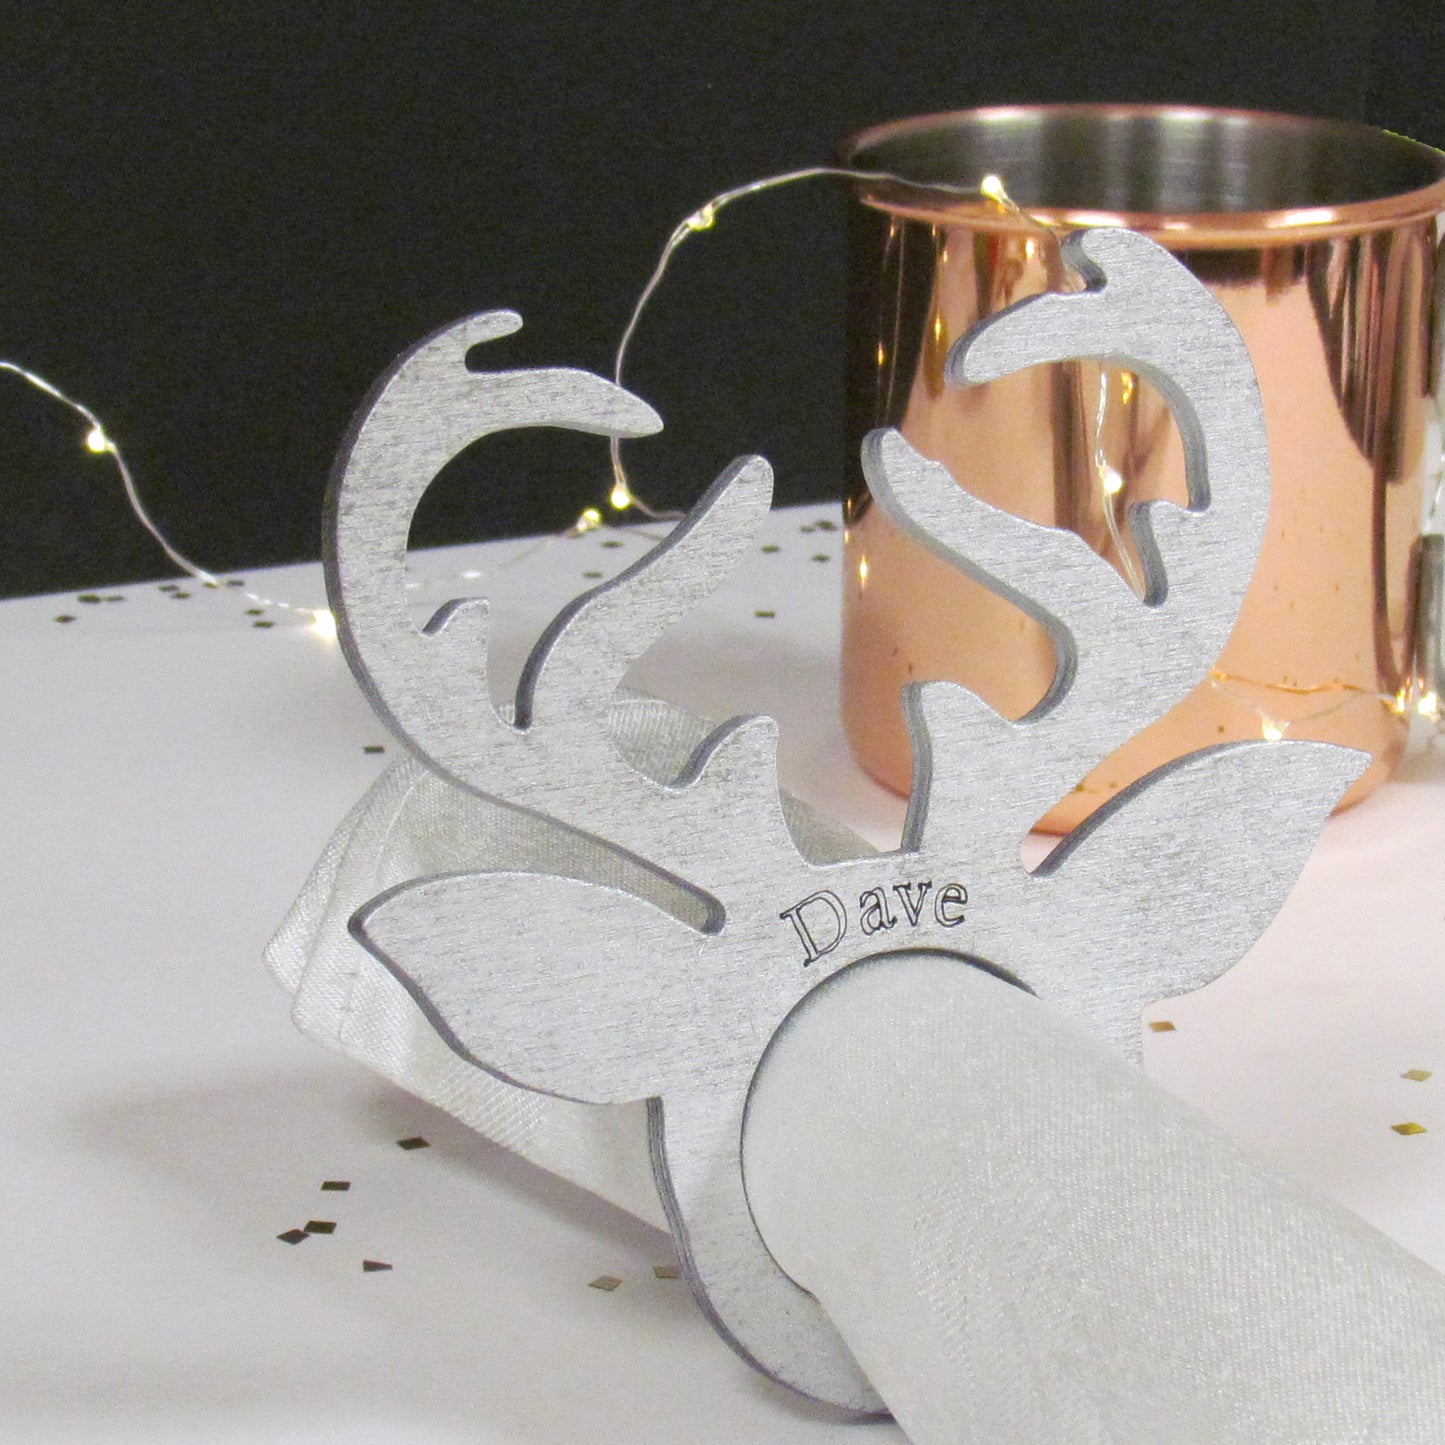 Stag Napkin Rings Name Place Setting